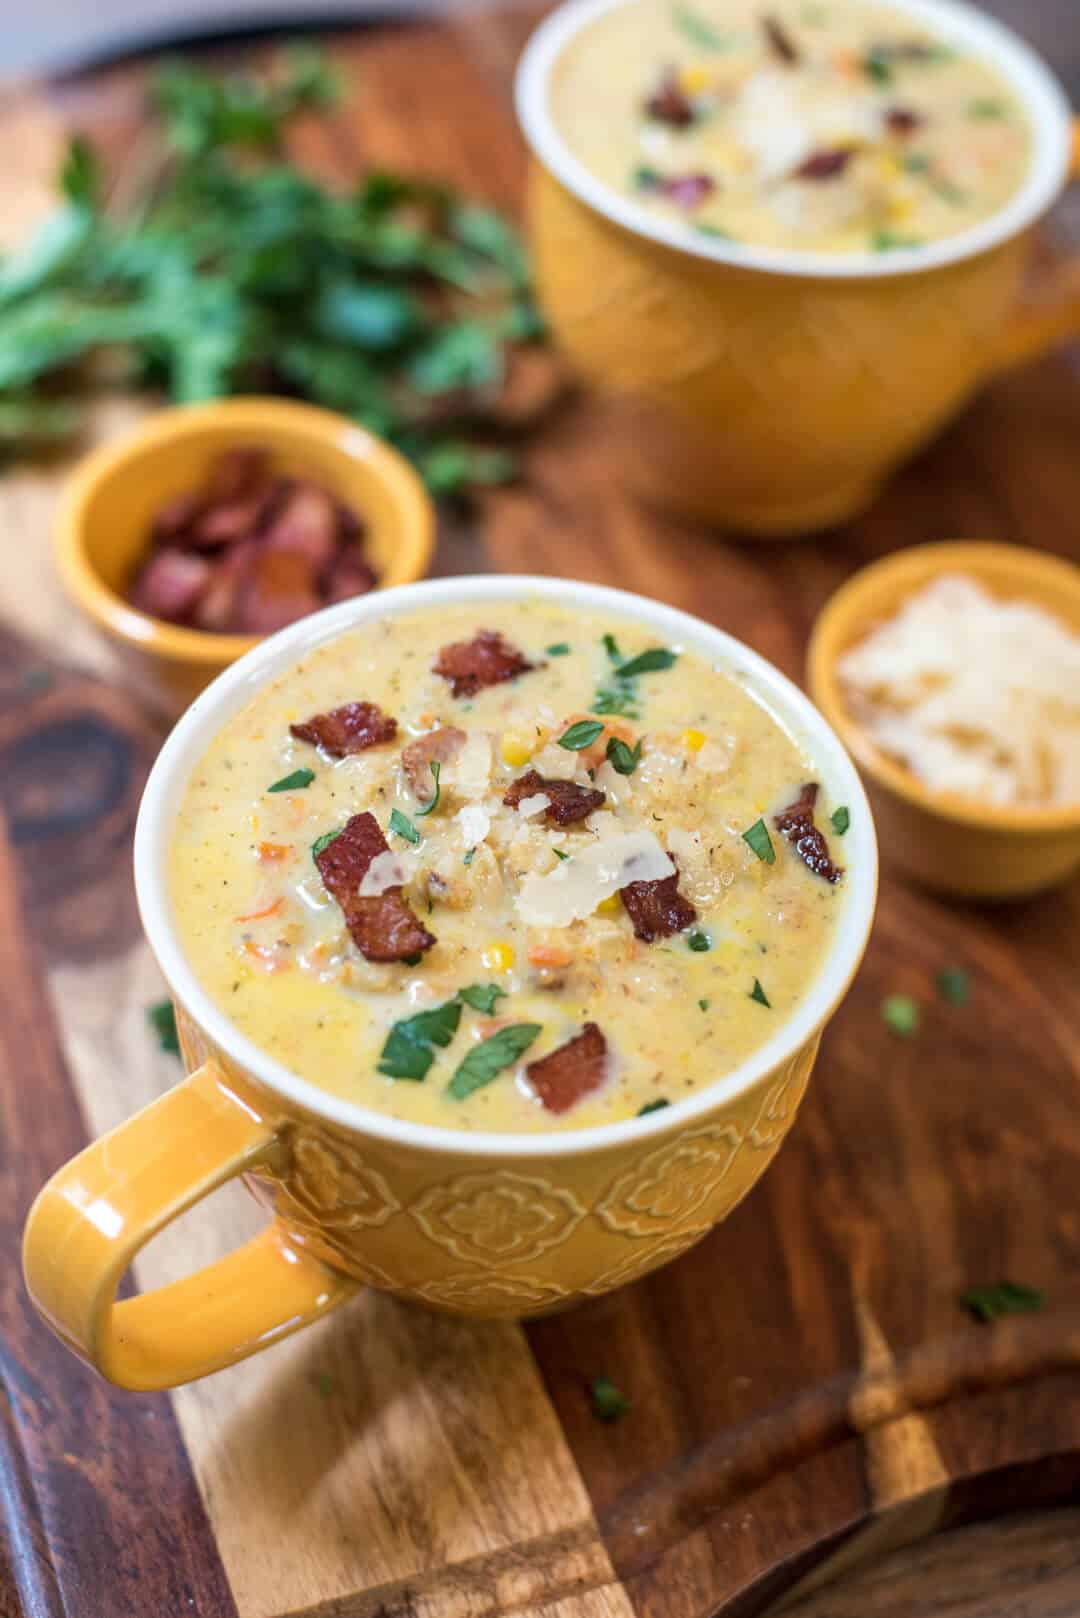 Roasted cauliflower, garlic, bacon and Parmesan add incredible flavor that pairs perfectly with sweet corn in this Roasted Cauliflower Corn Chowder.